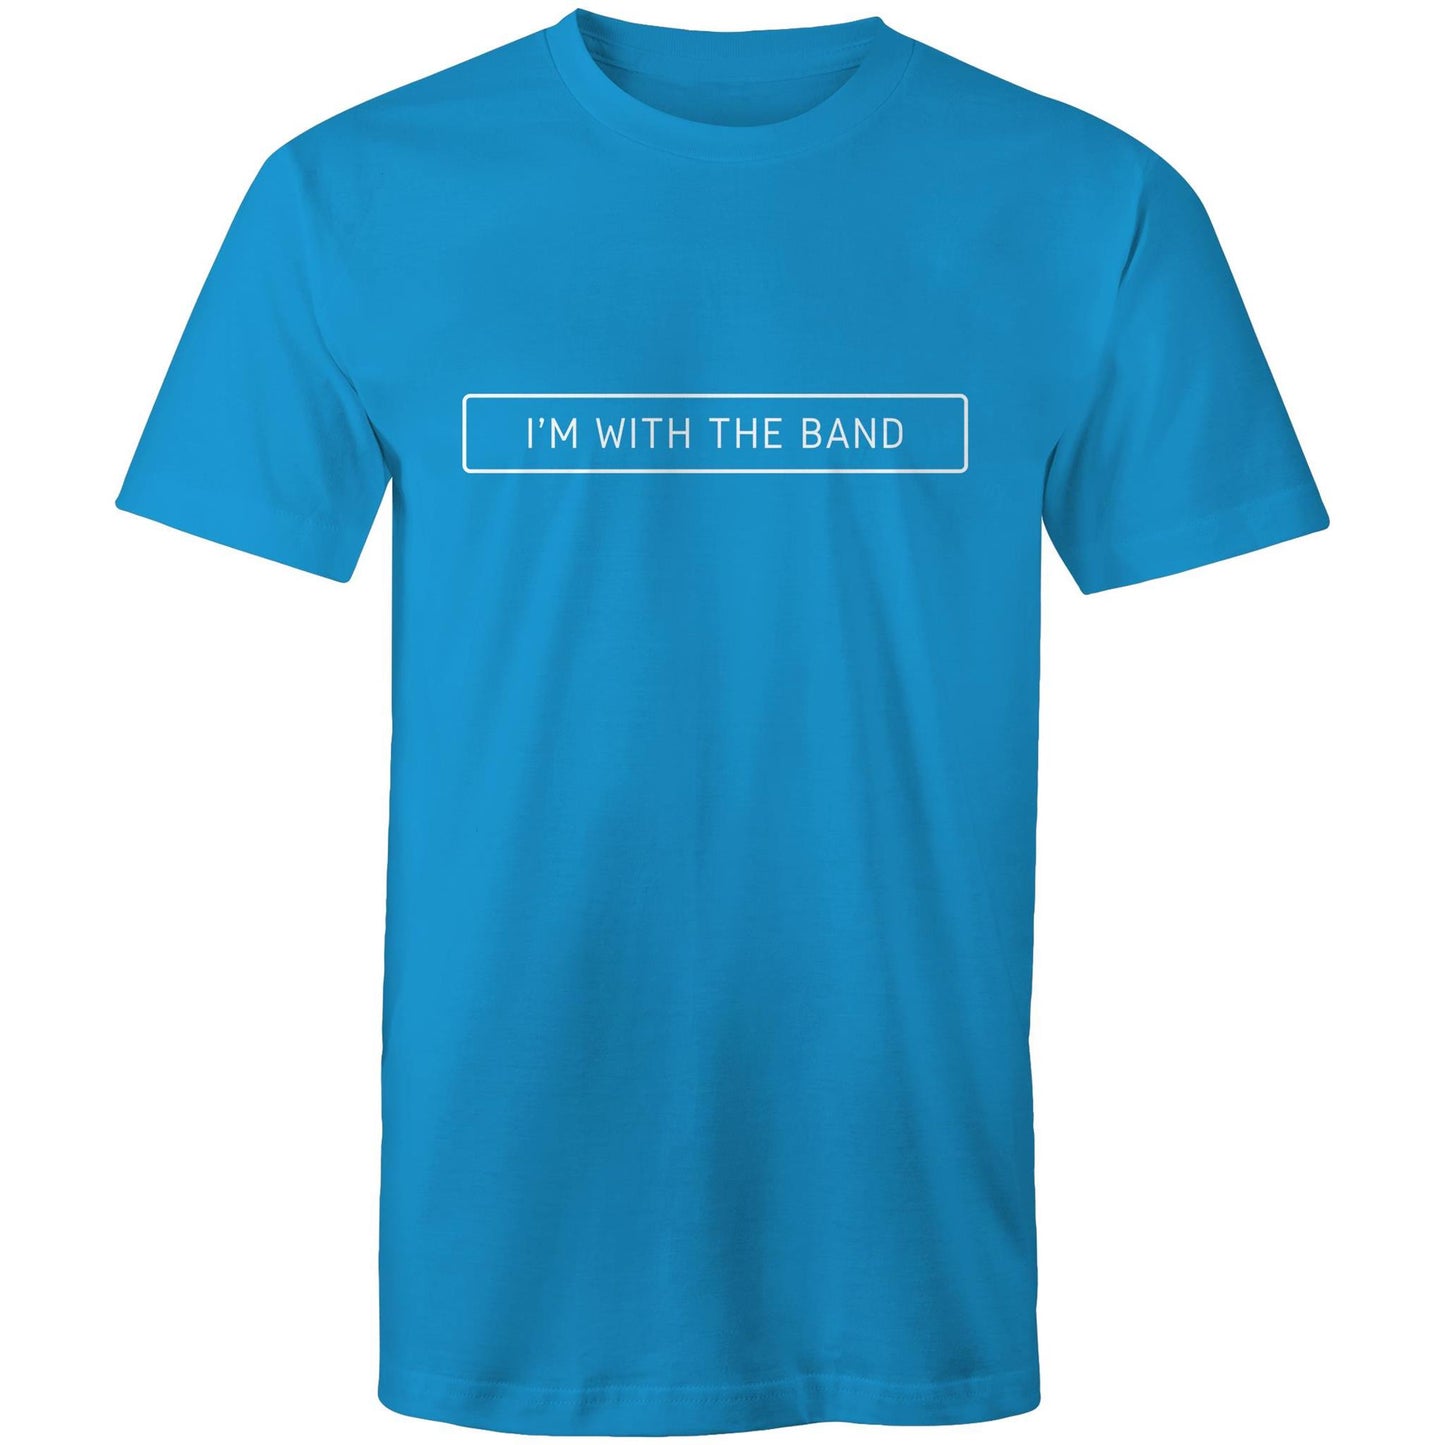 I'm With The Band - Mens T-Shirt Arctic Blue Mens T-shirt Music